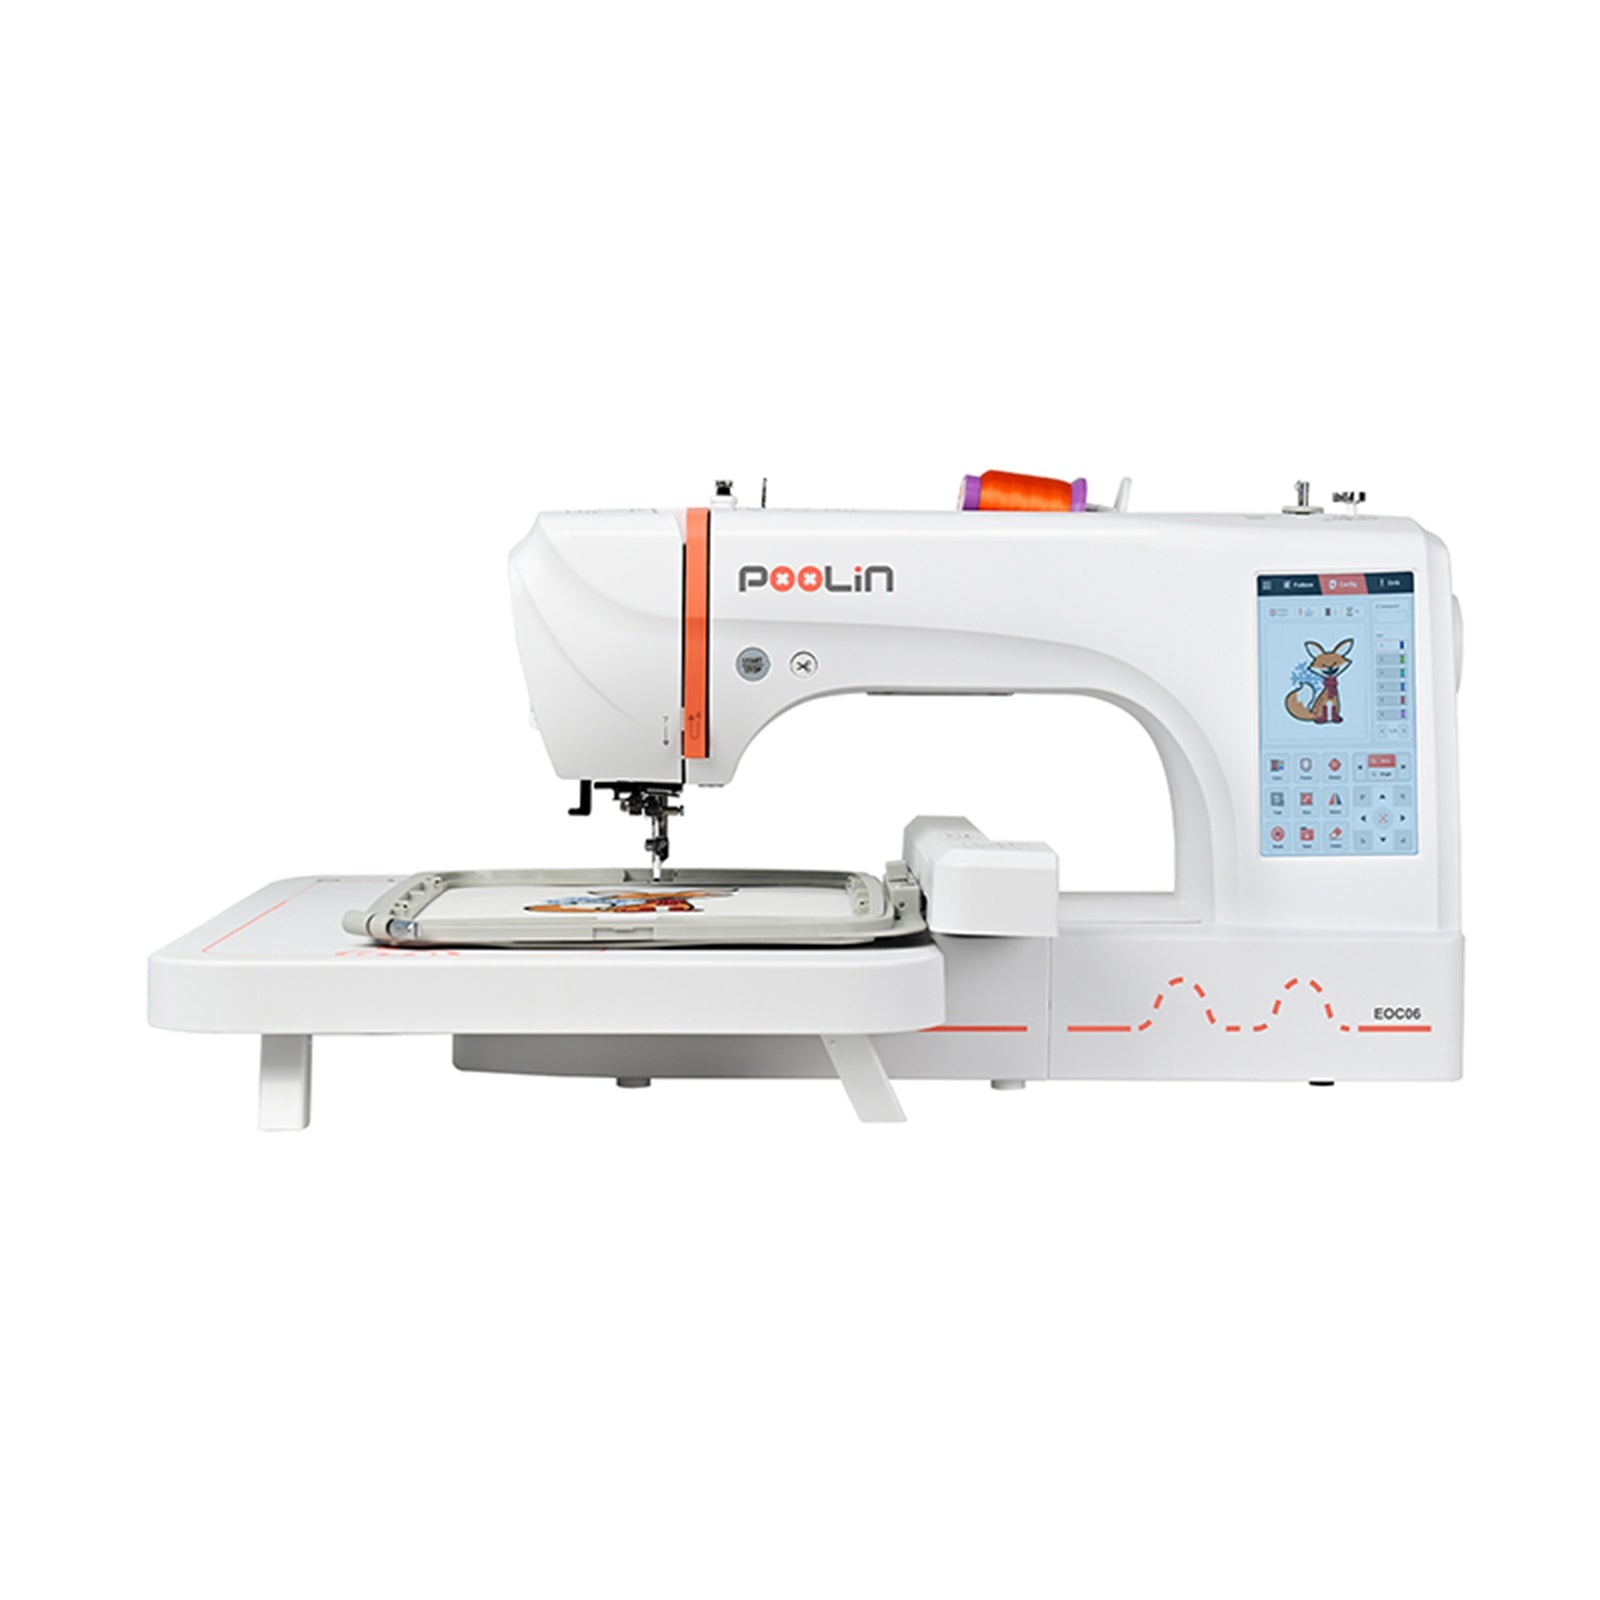 EOC06 Newest Computerized Homeuse Embroidery Machine 4-7 Days Delivery